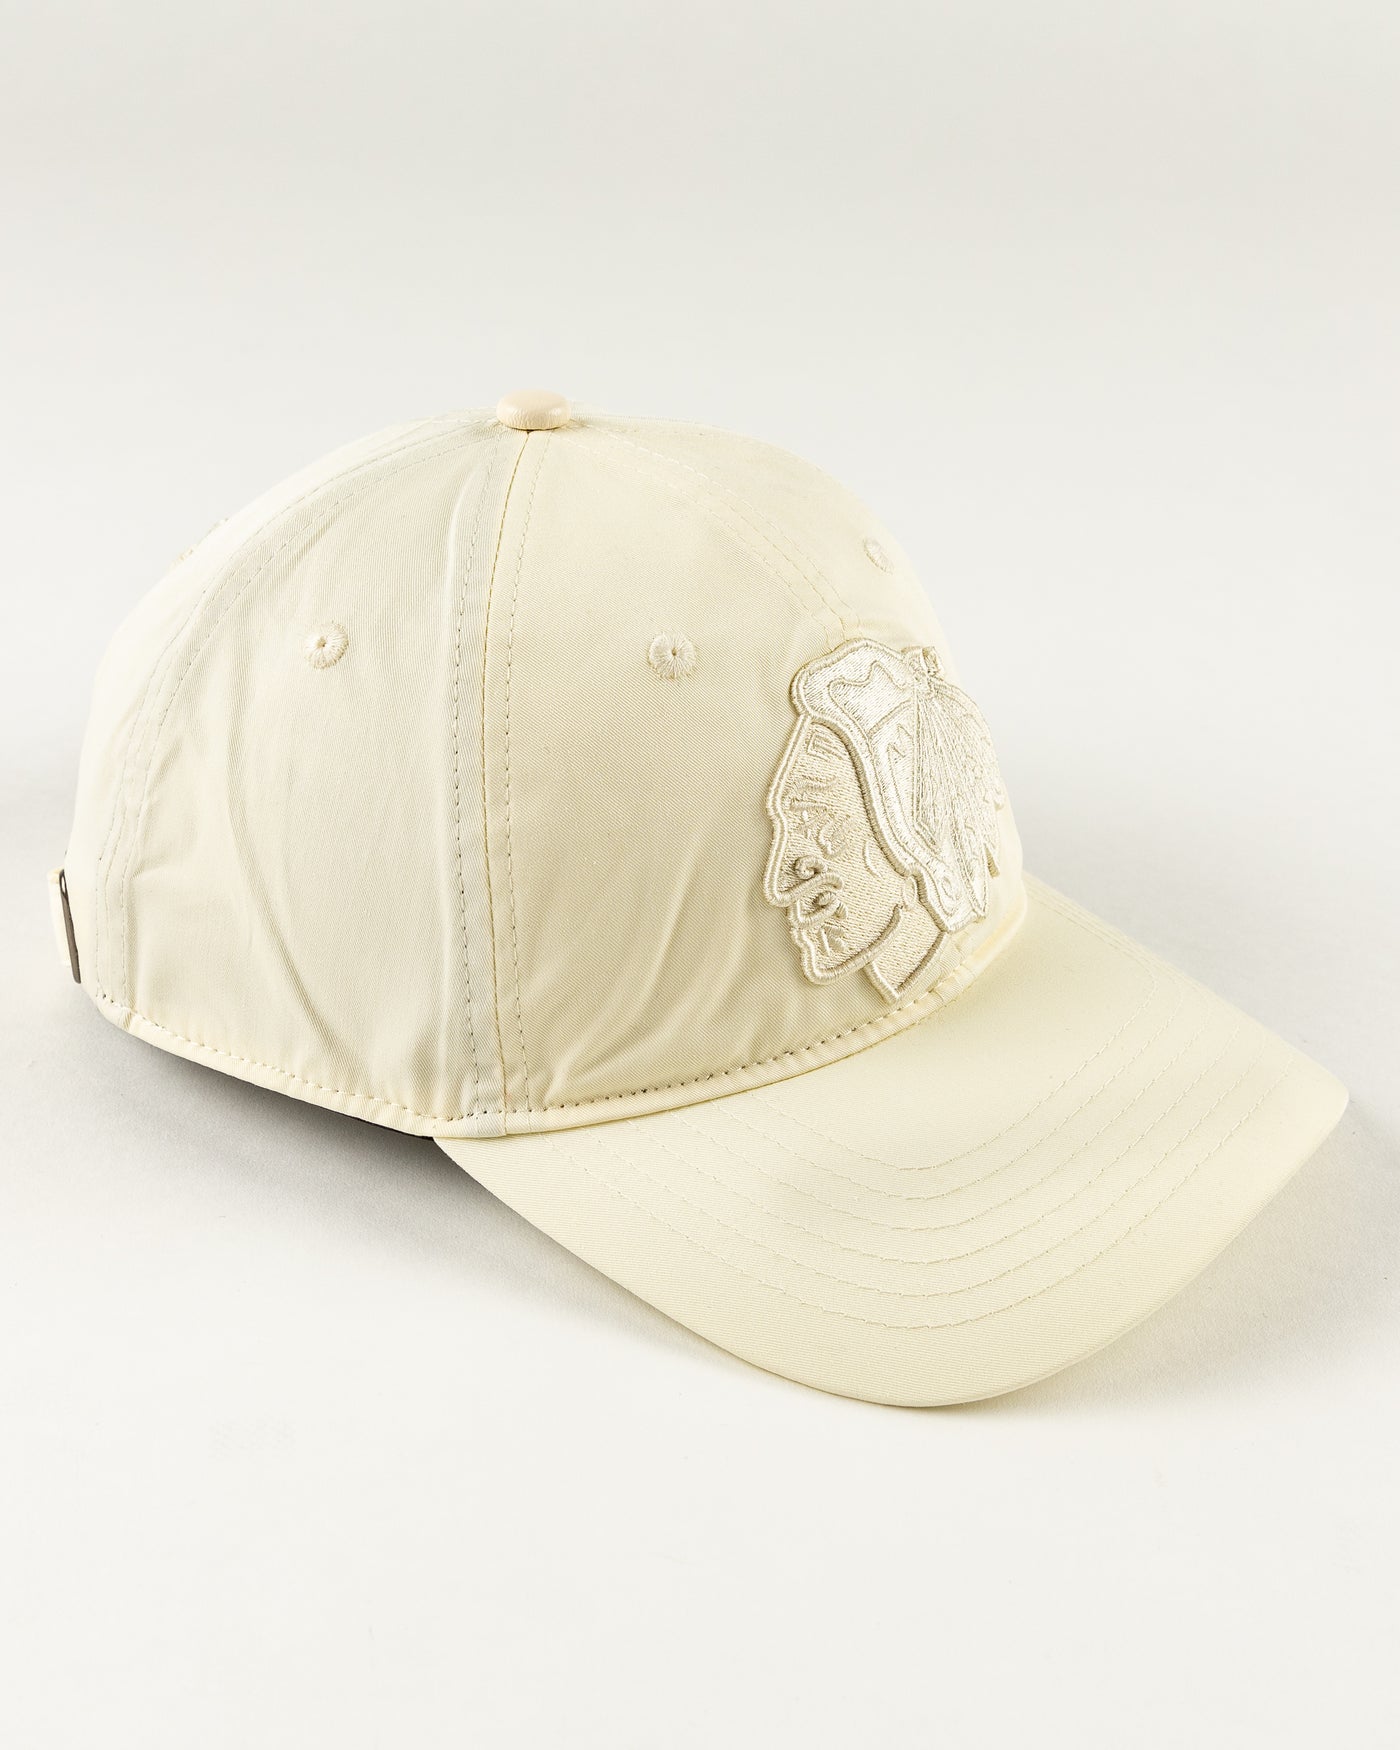 all eggshell adjustable cap with tonal Chicago Blackhawks primary logo embroidered on front - right angle lay flat 